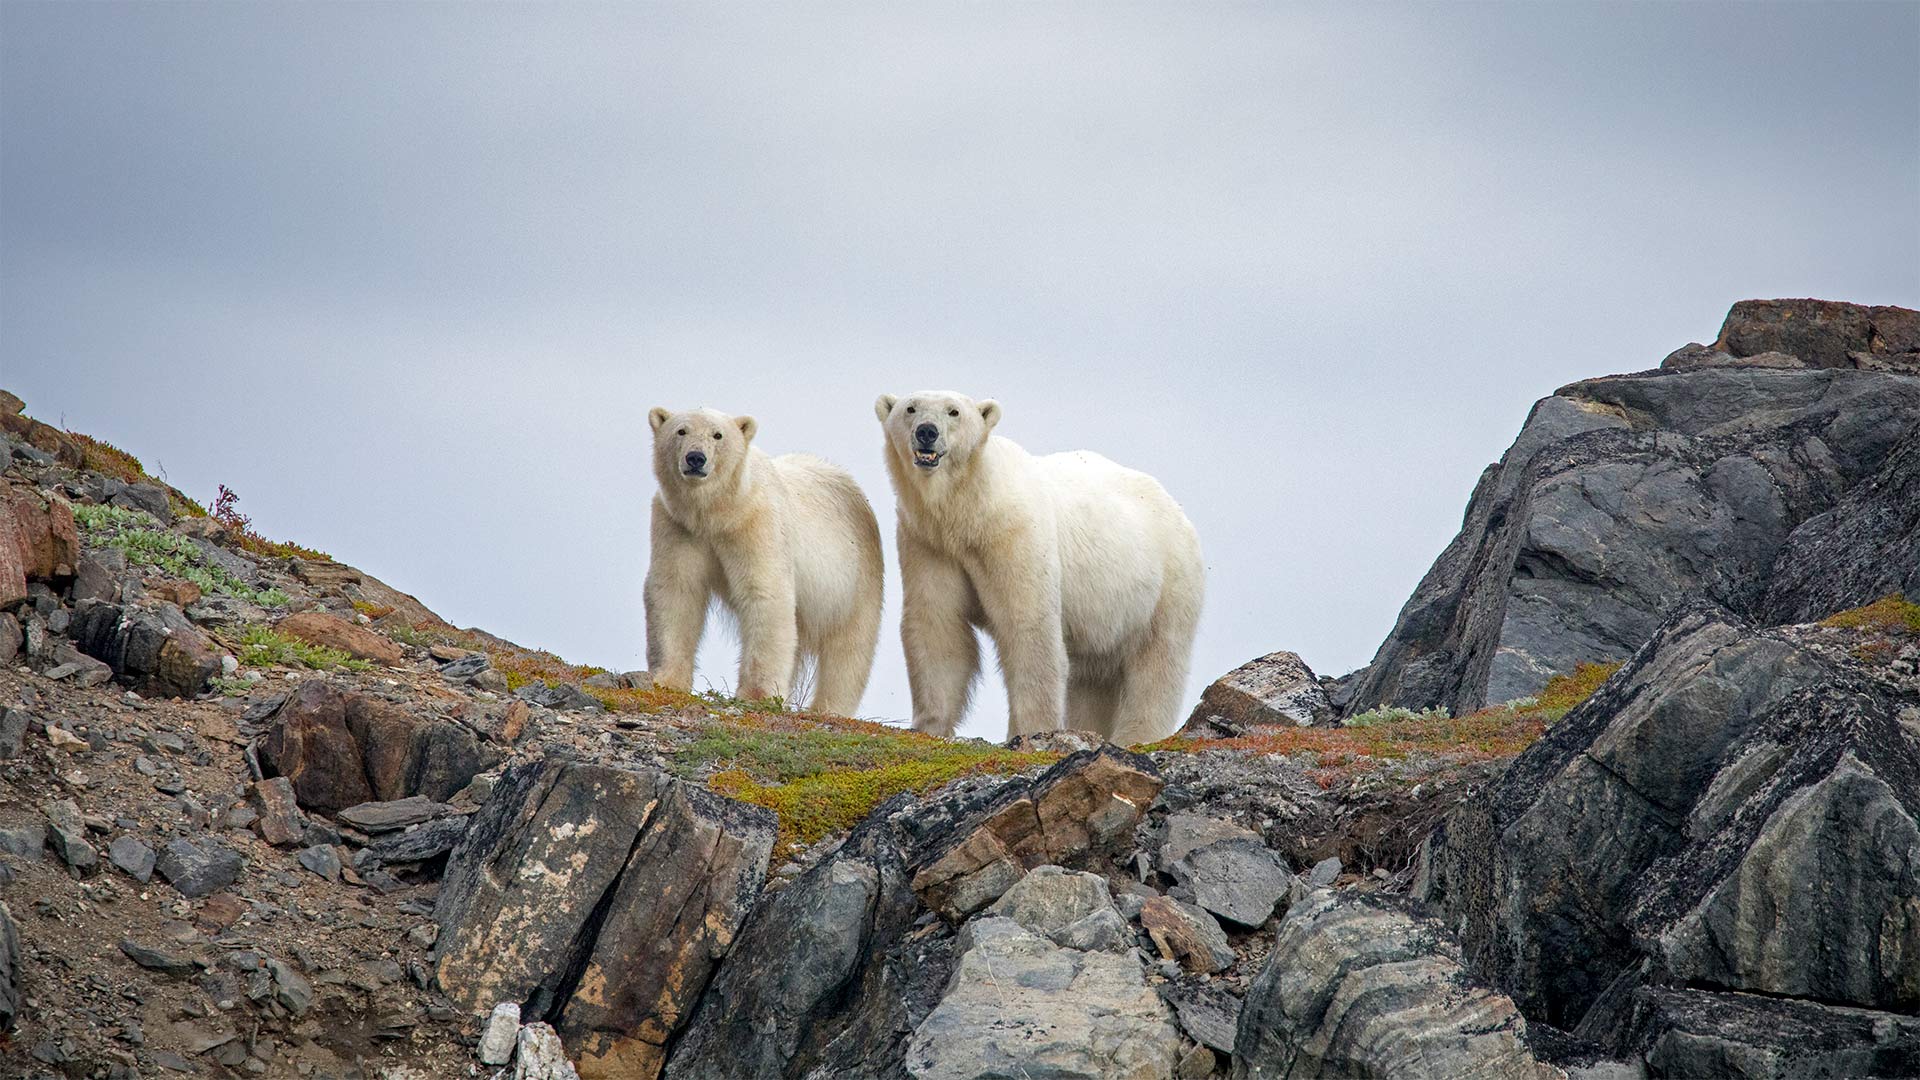 Polar bears in Torngat Mountains National Park, Canada - Cavan Images/Offset by Shutterstock)